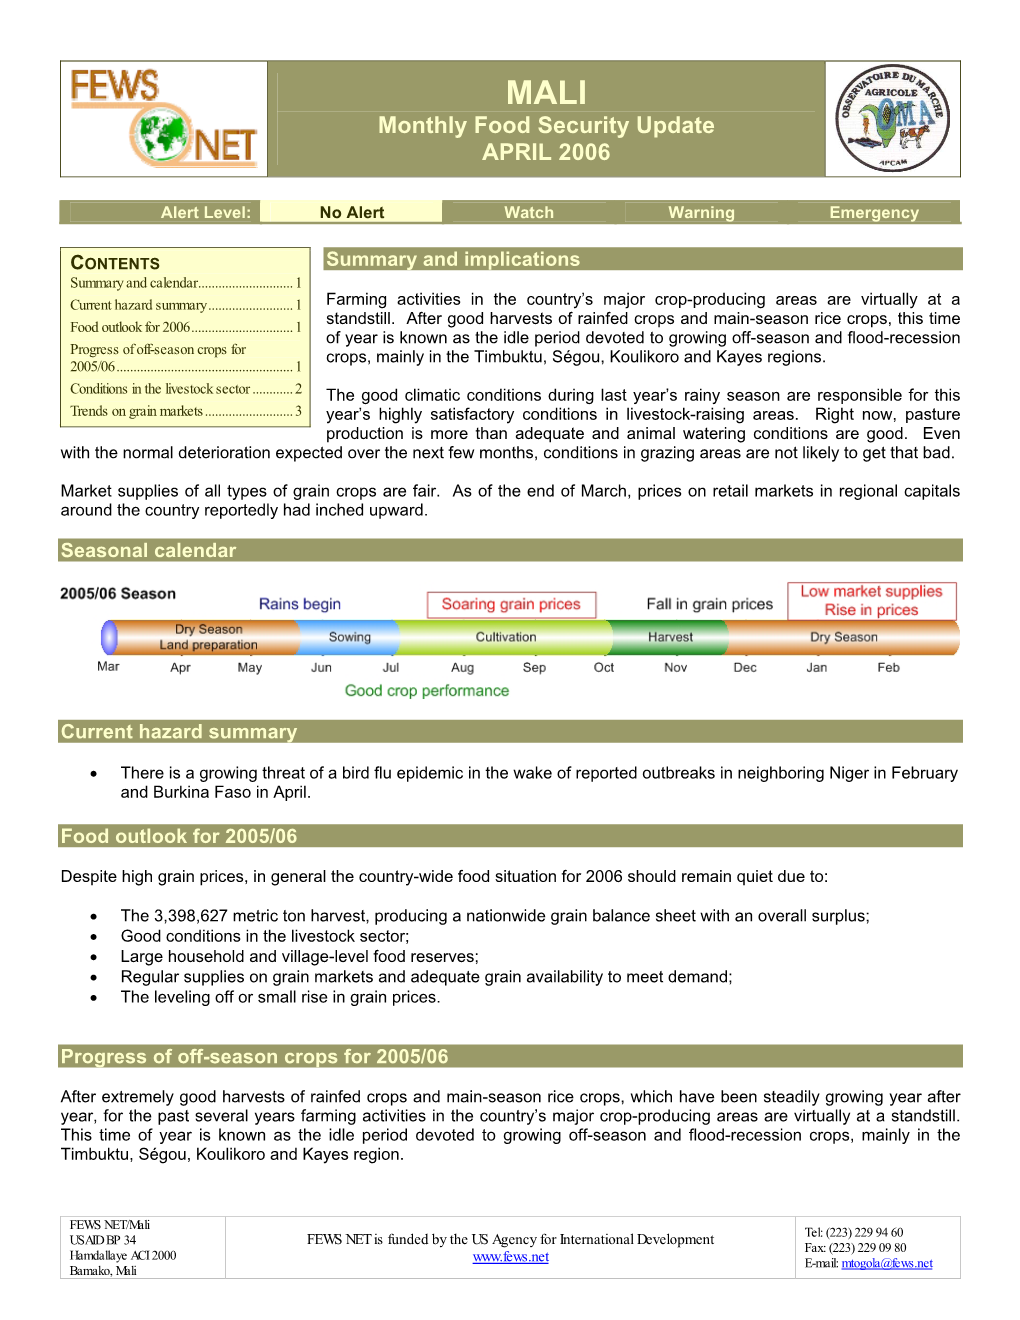 Mali Monthly Food Security Update, April 2006